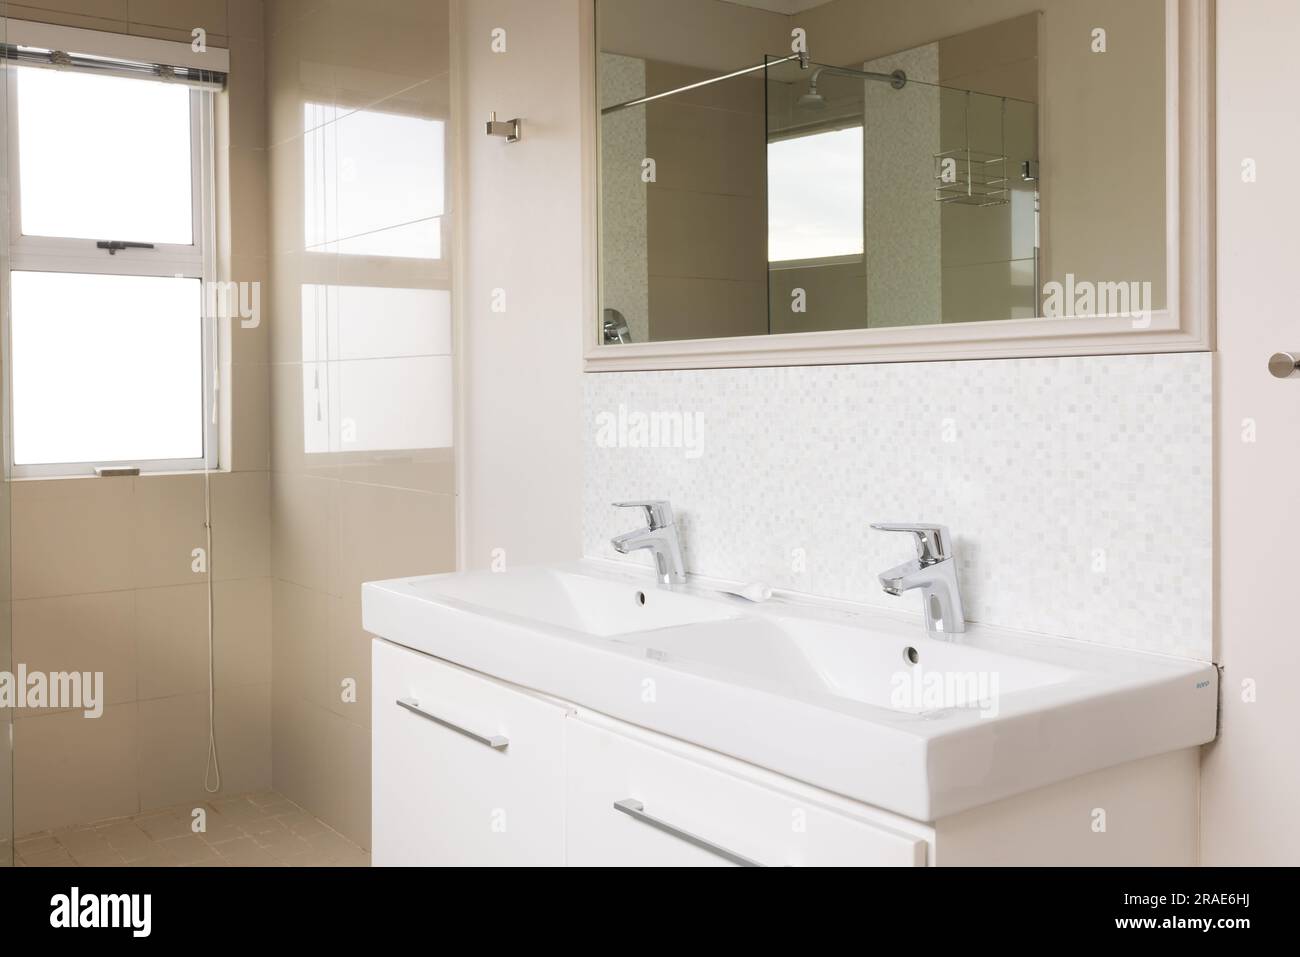 General view of bright bathroom with shower, mirror and washbasin Stock Photo